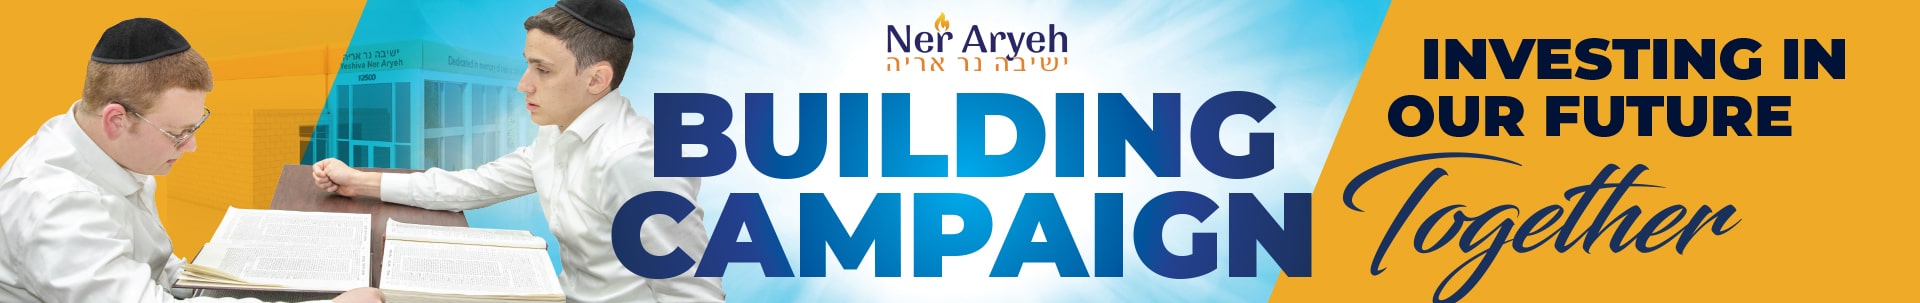 NALA building campaign banner